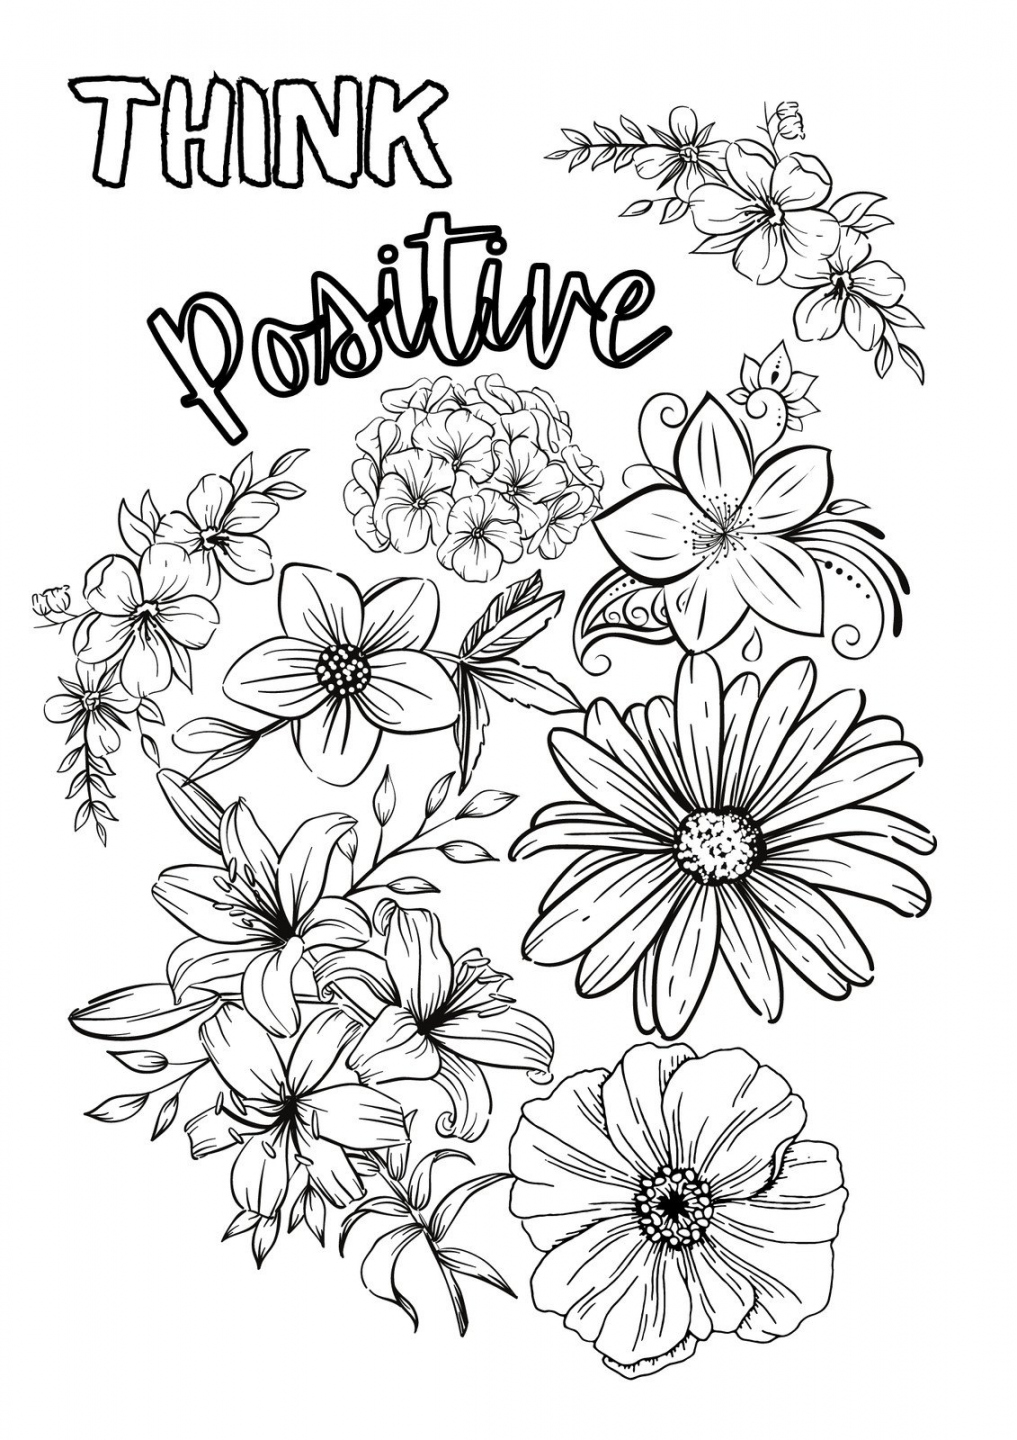 Printable Coloring Sheets Free - Printable - Free printable coloring page templates to customize  Canva